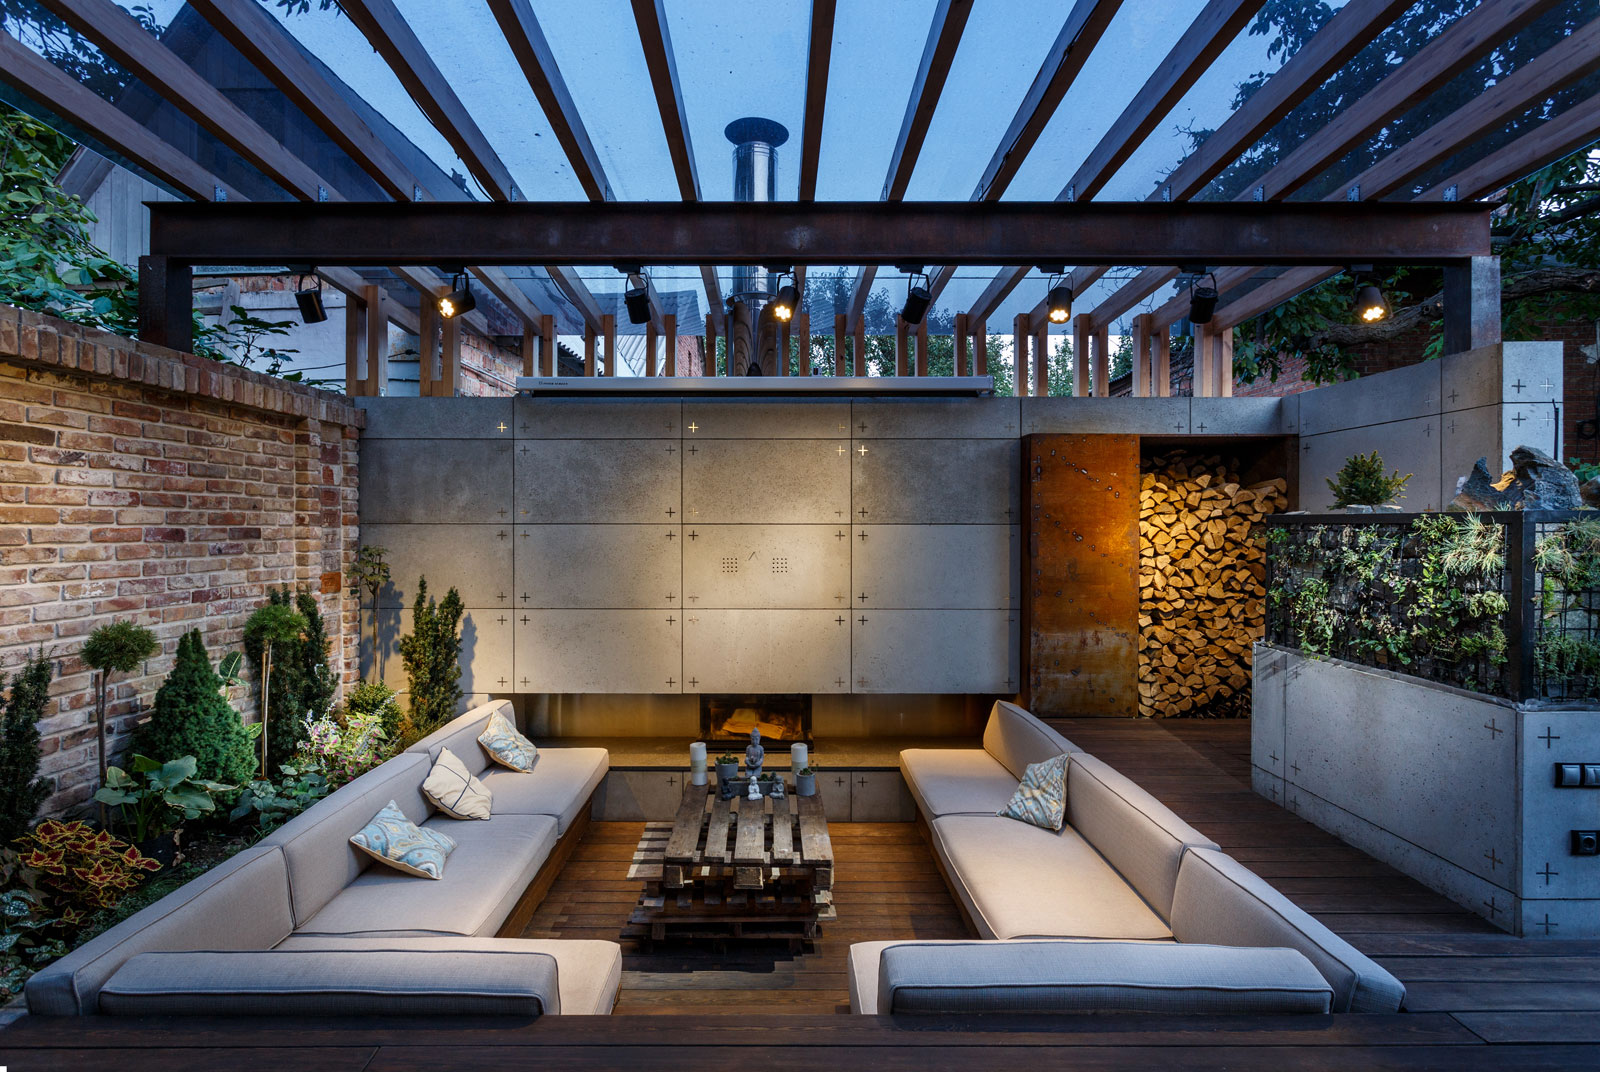 Contemporary Compact Courtyard of Lounge Zone by SVOYA studio-21